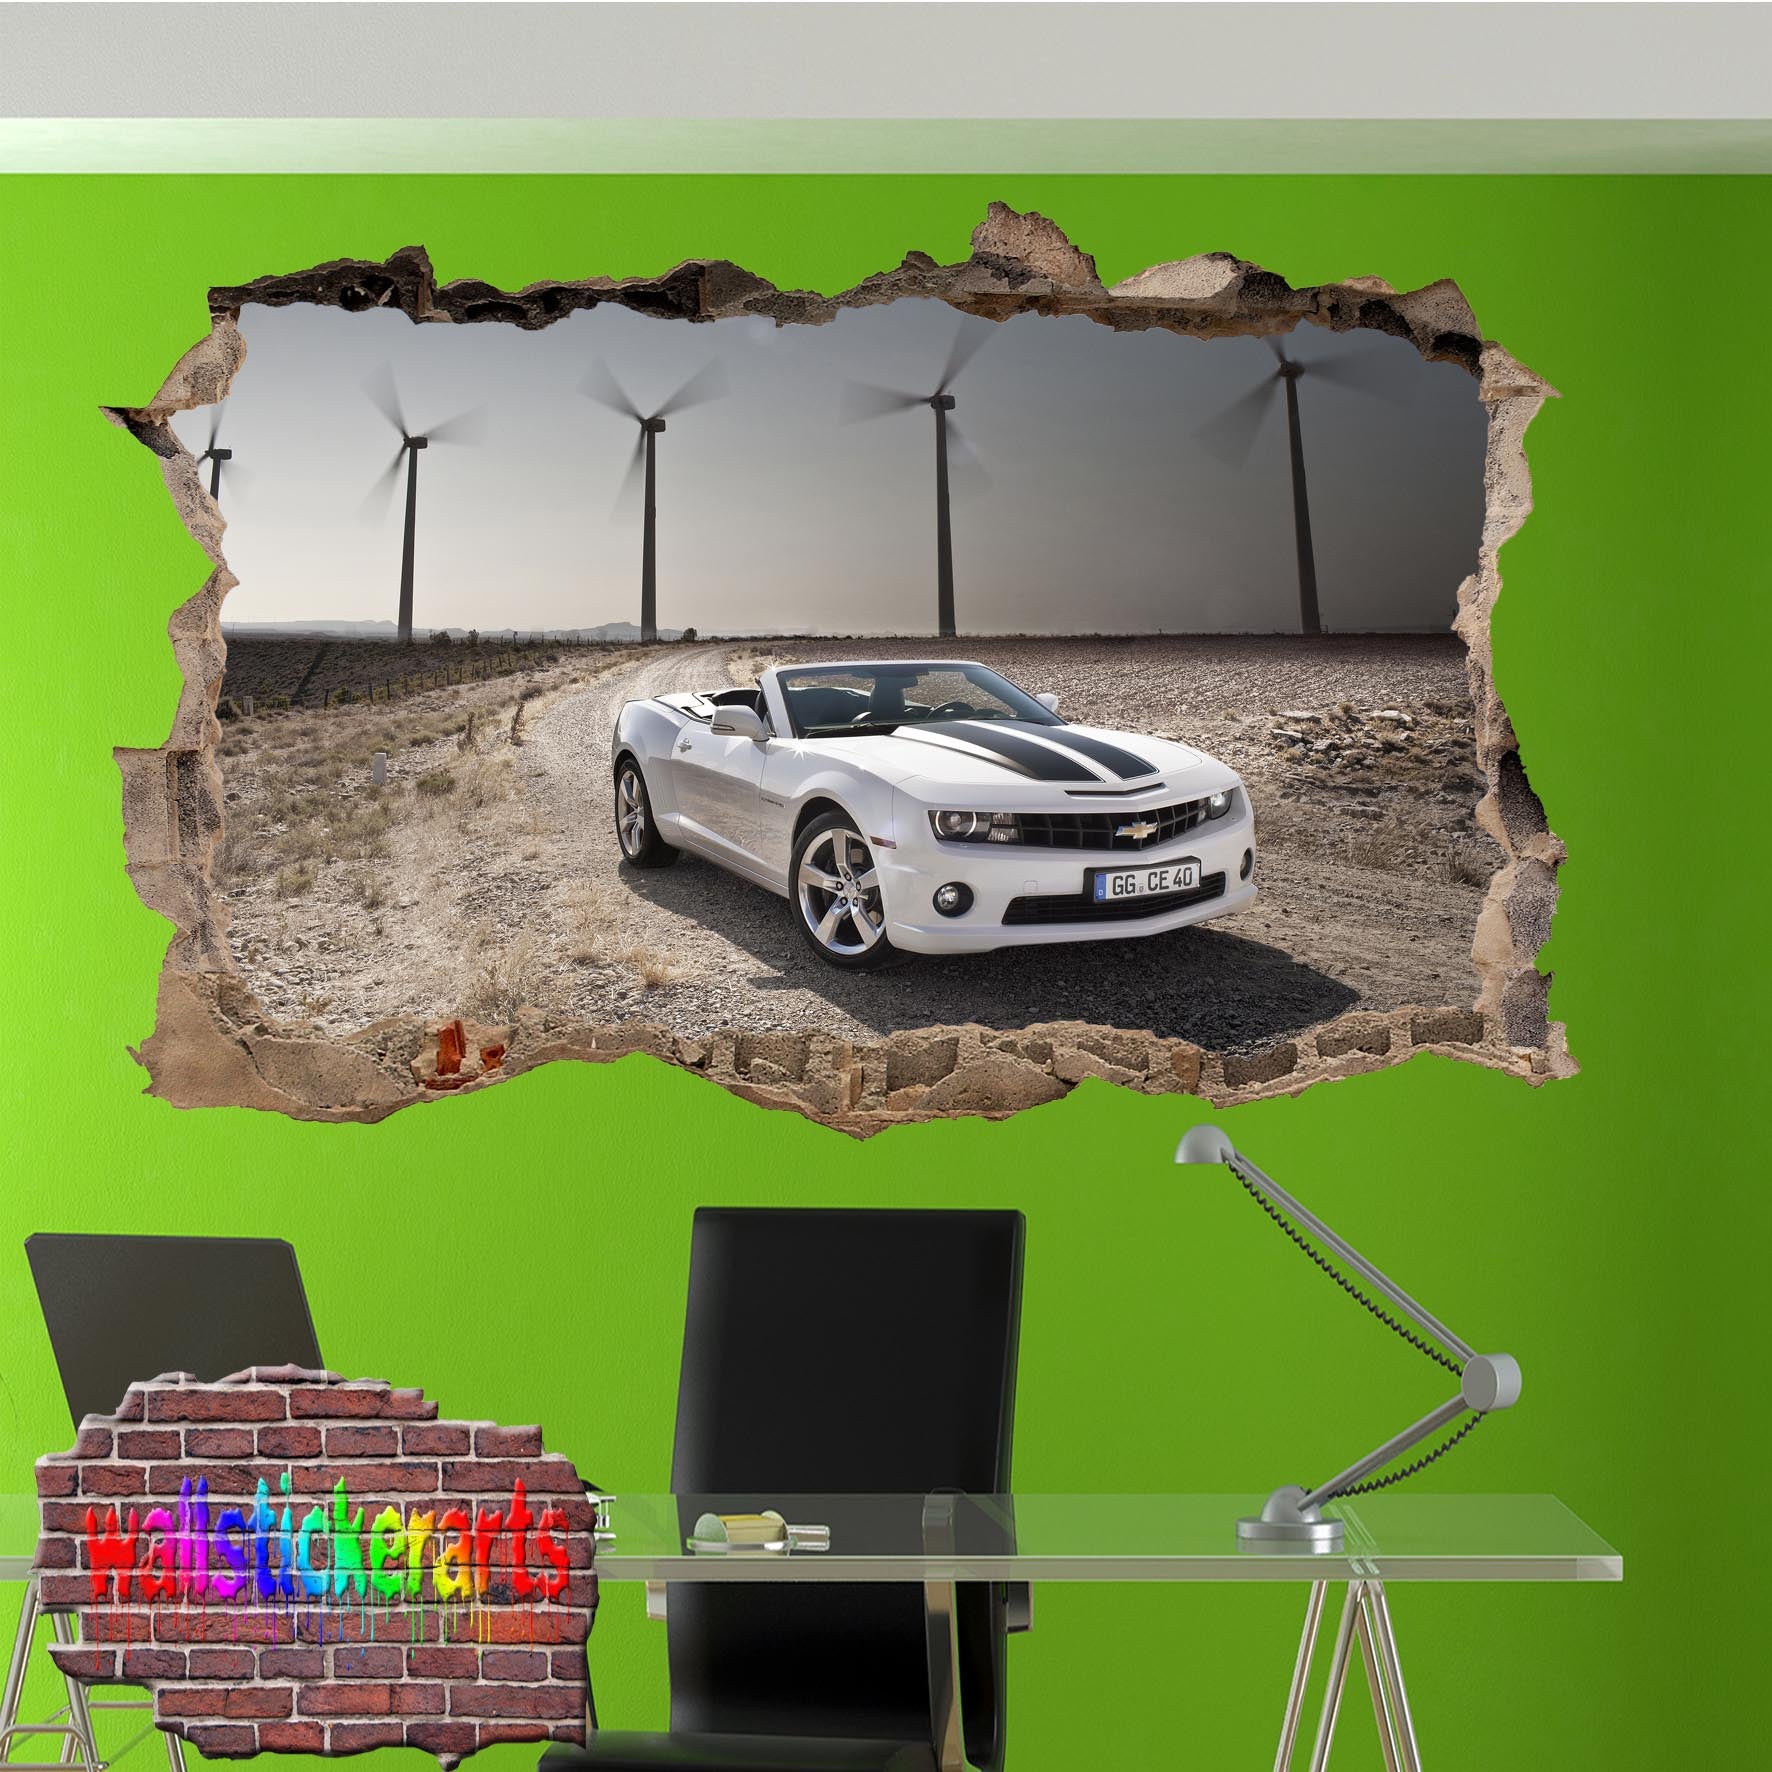 Chevrolet Camaro Wall Sticker poster mural decal